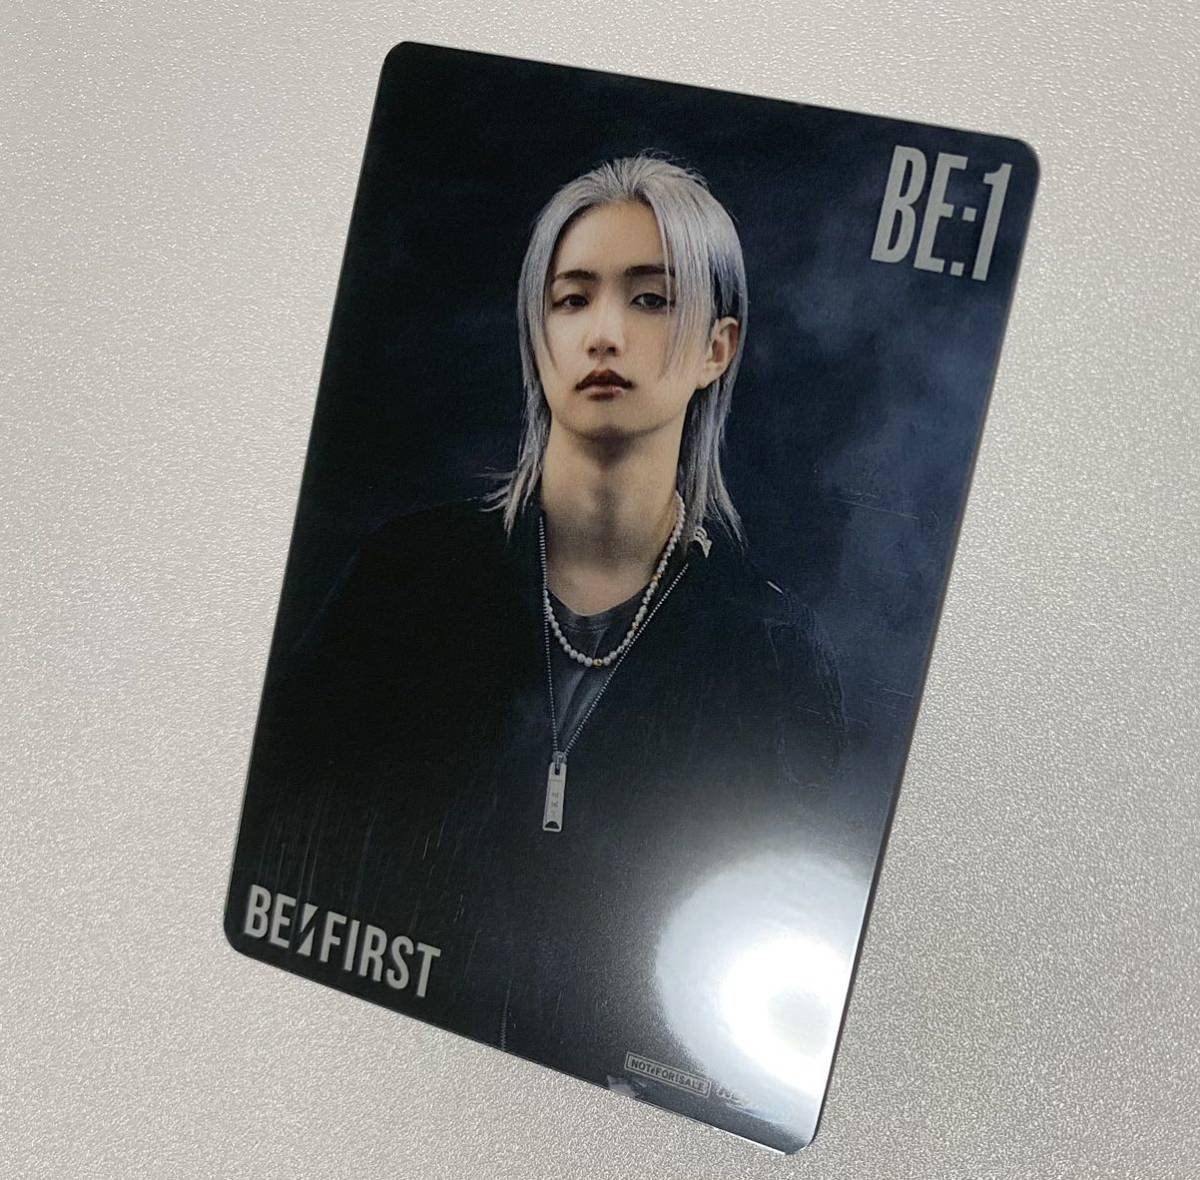 BE:FIRST BE:1 Neowing Neo wing clear trading card JUNON juno nPhotocard